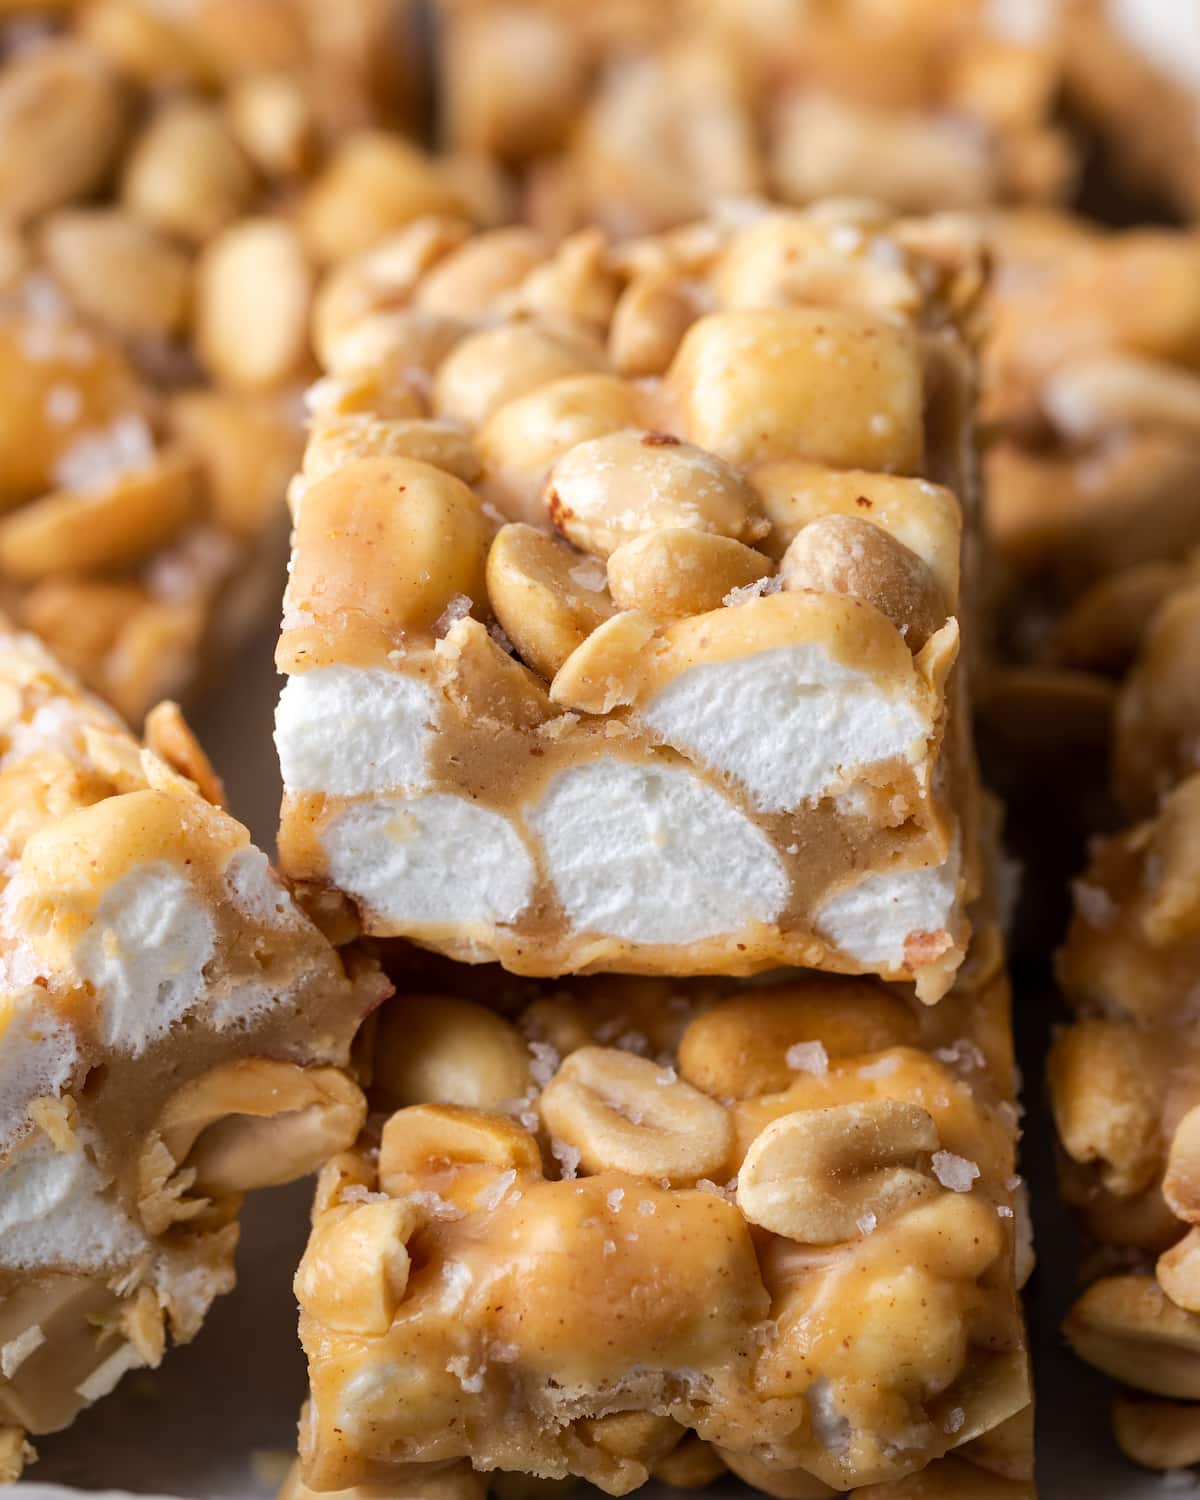 Close up of a homemade PayDay bar with a peanut and marshmallow center, sitting on top of the other bars.